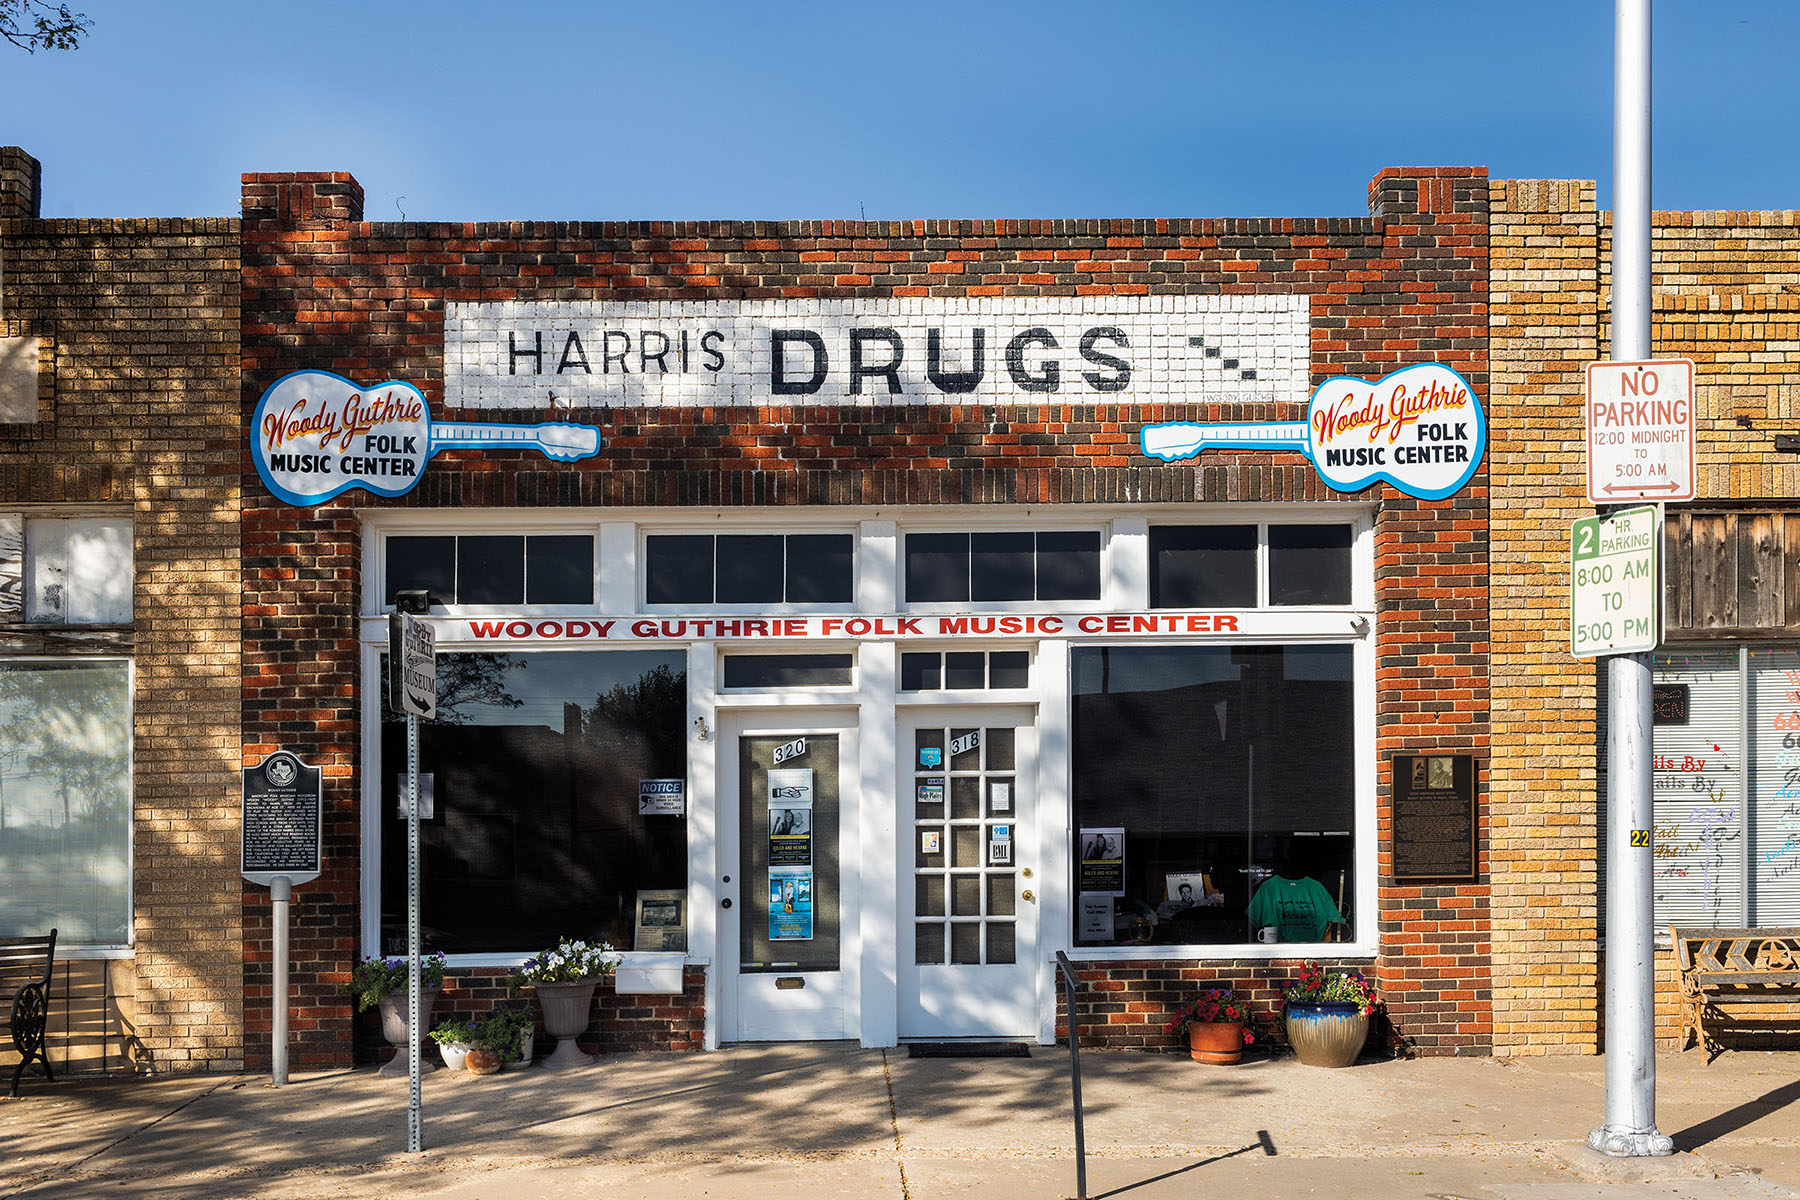 The exterior of a brick building with a sign reading "Harris Drugs" and paintings of guitars above the door